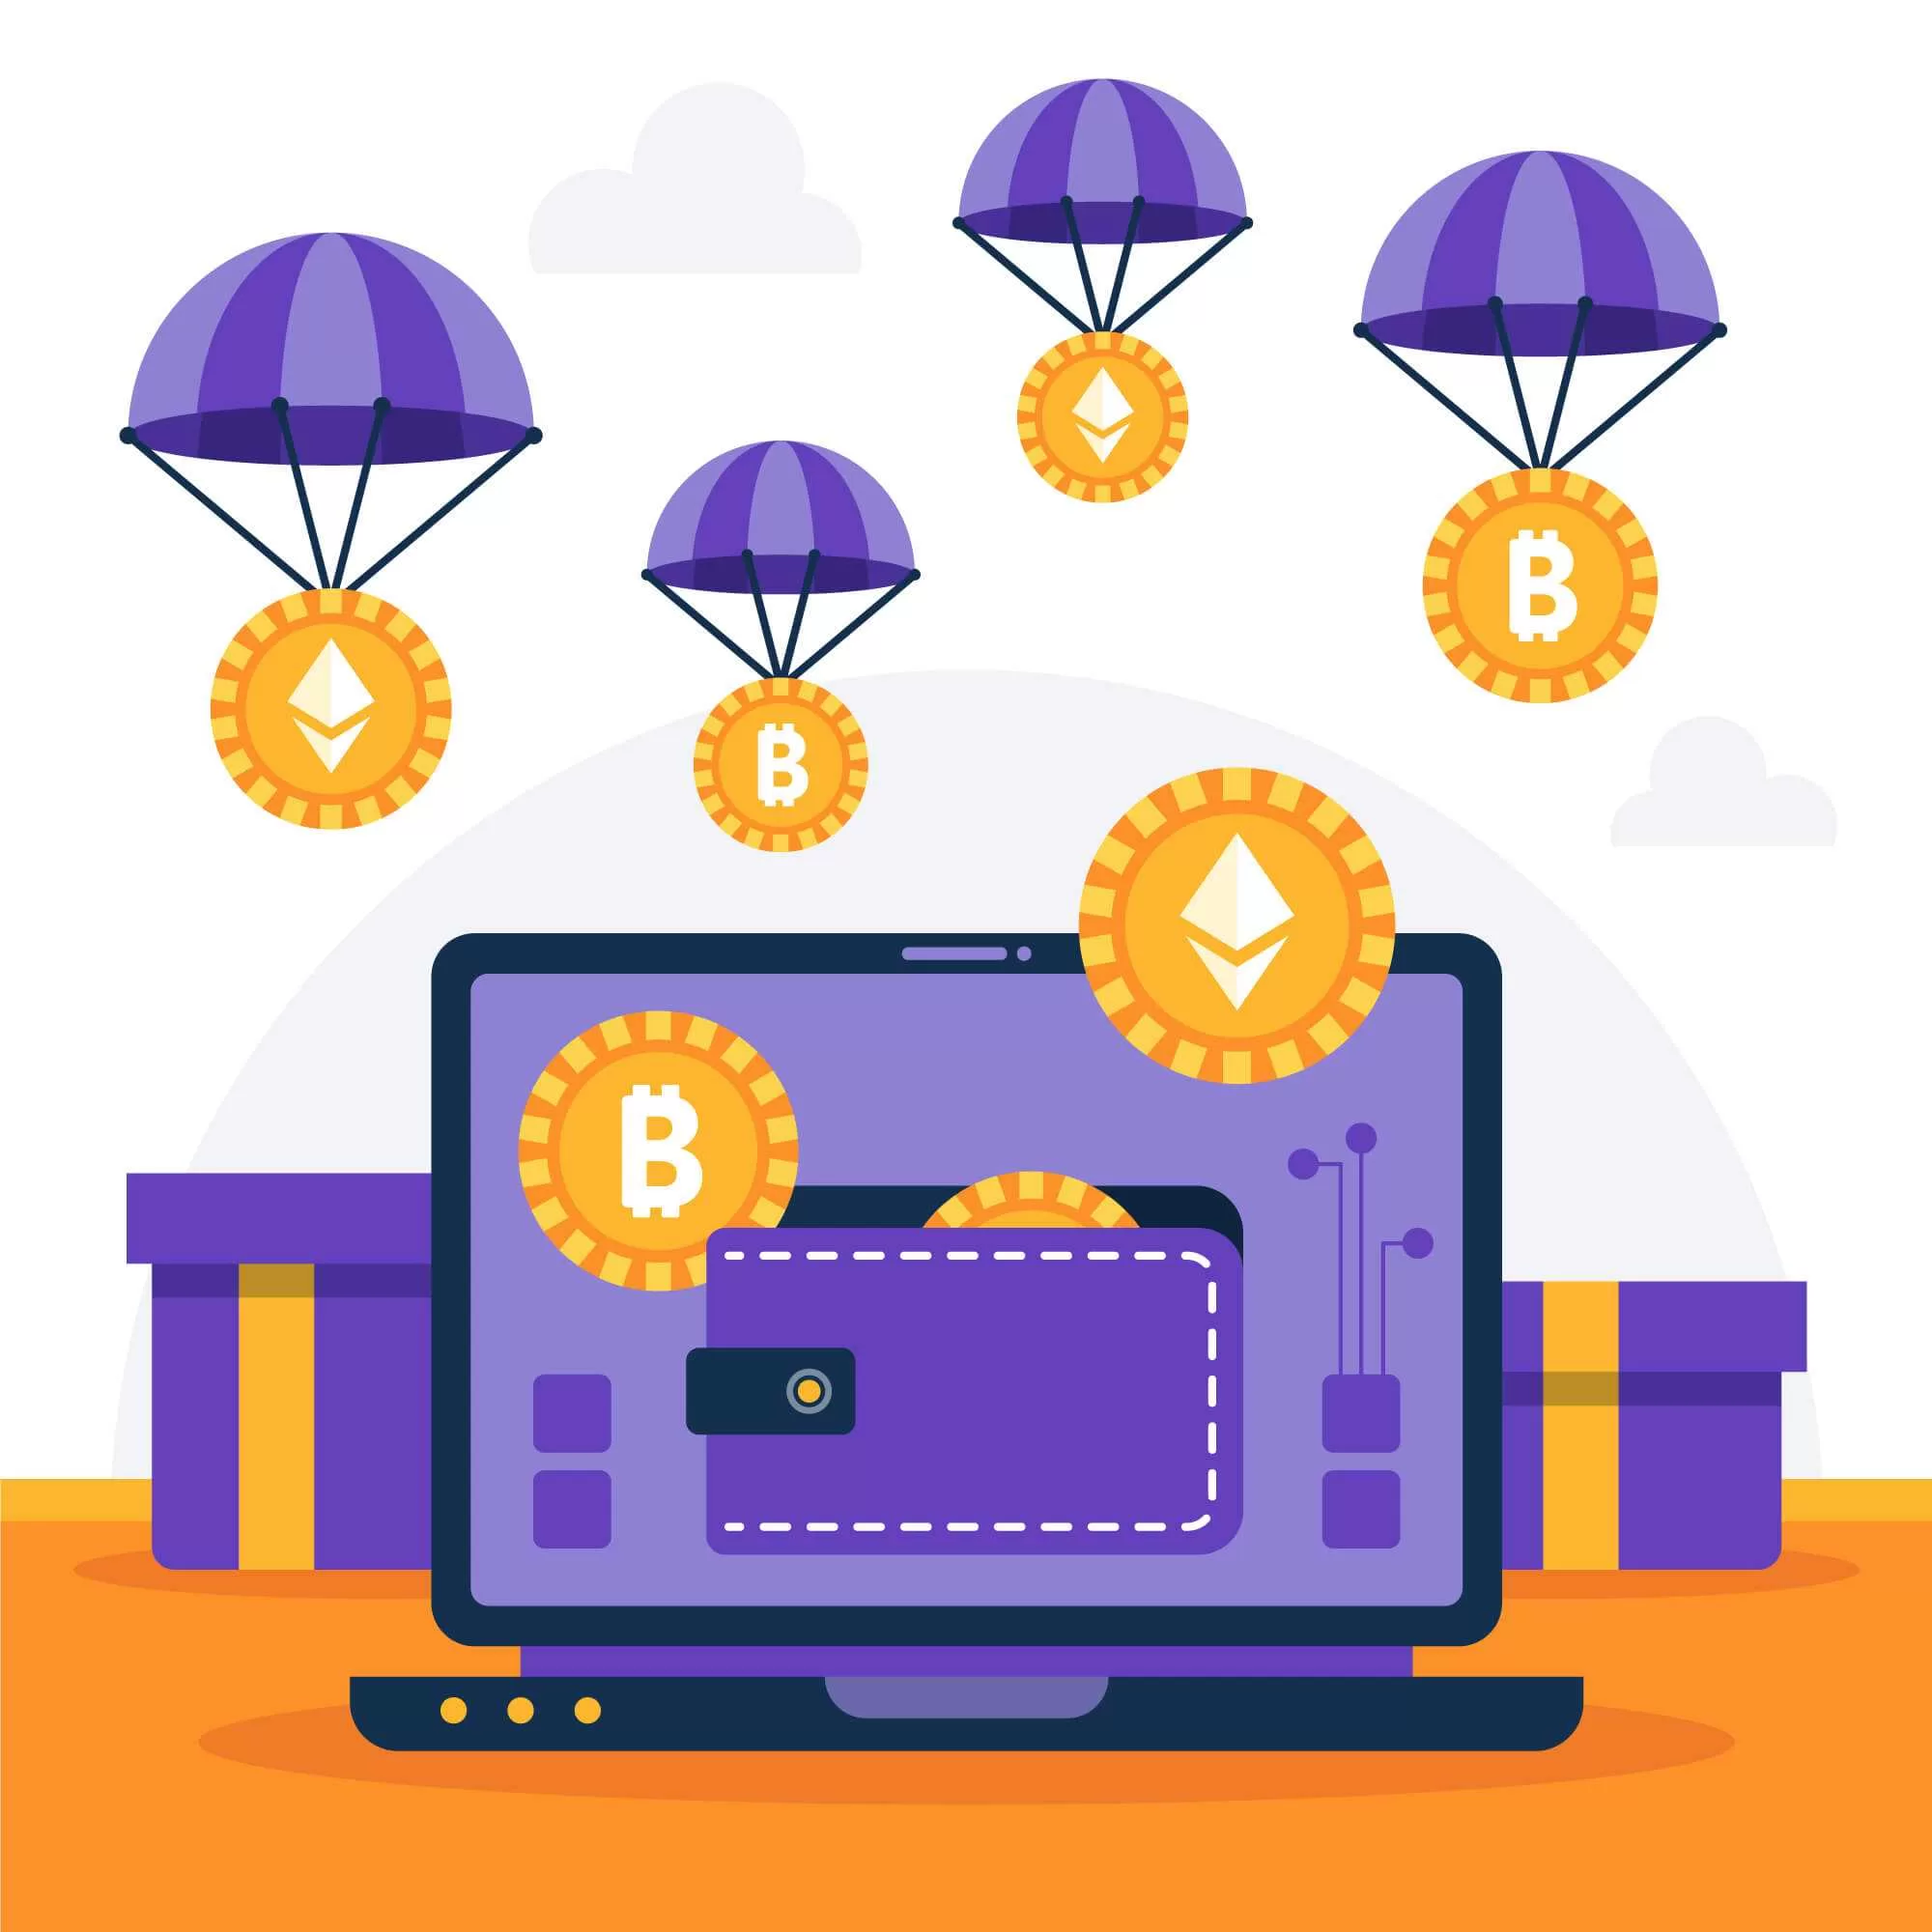 SEC's Bitcoin ETF Approval- Bitcoin Image with parachute!